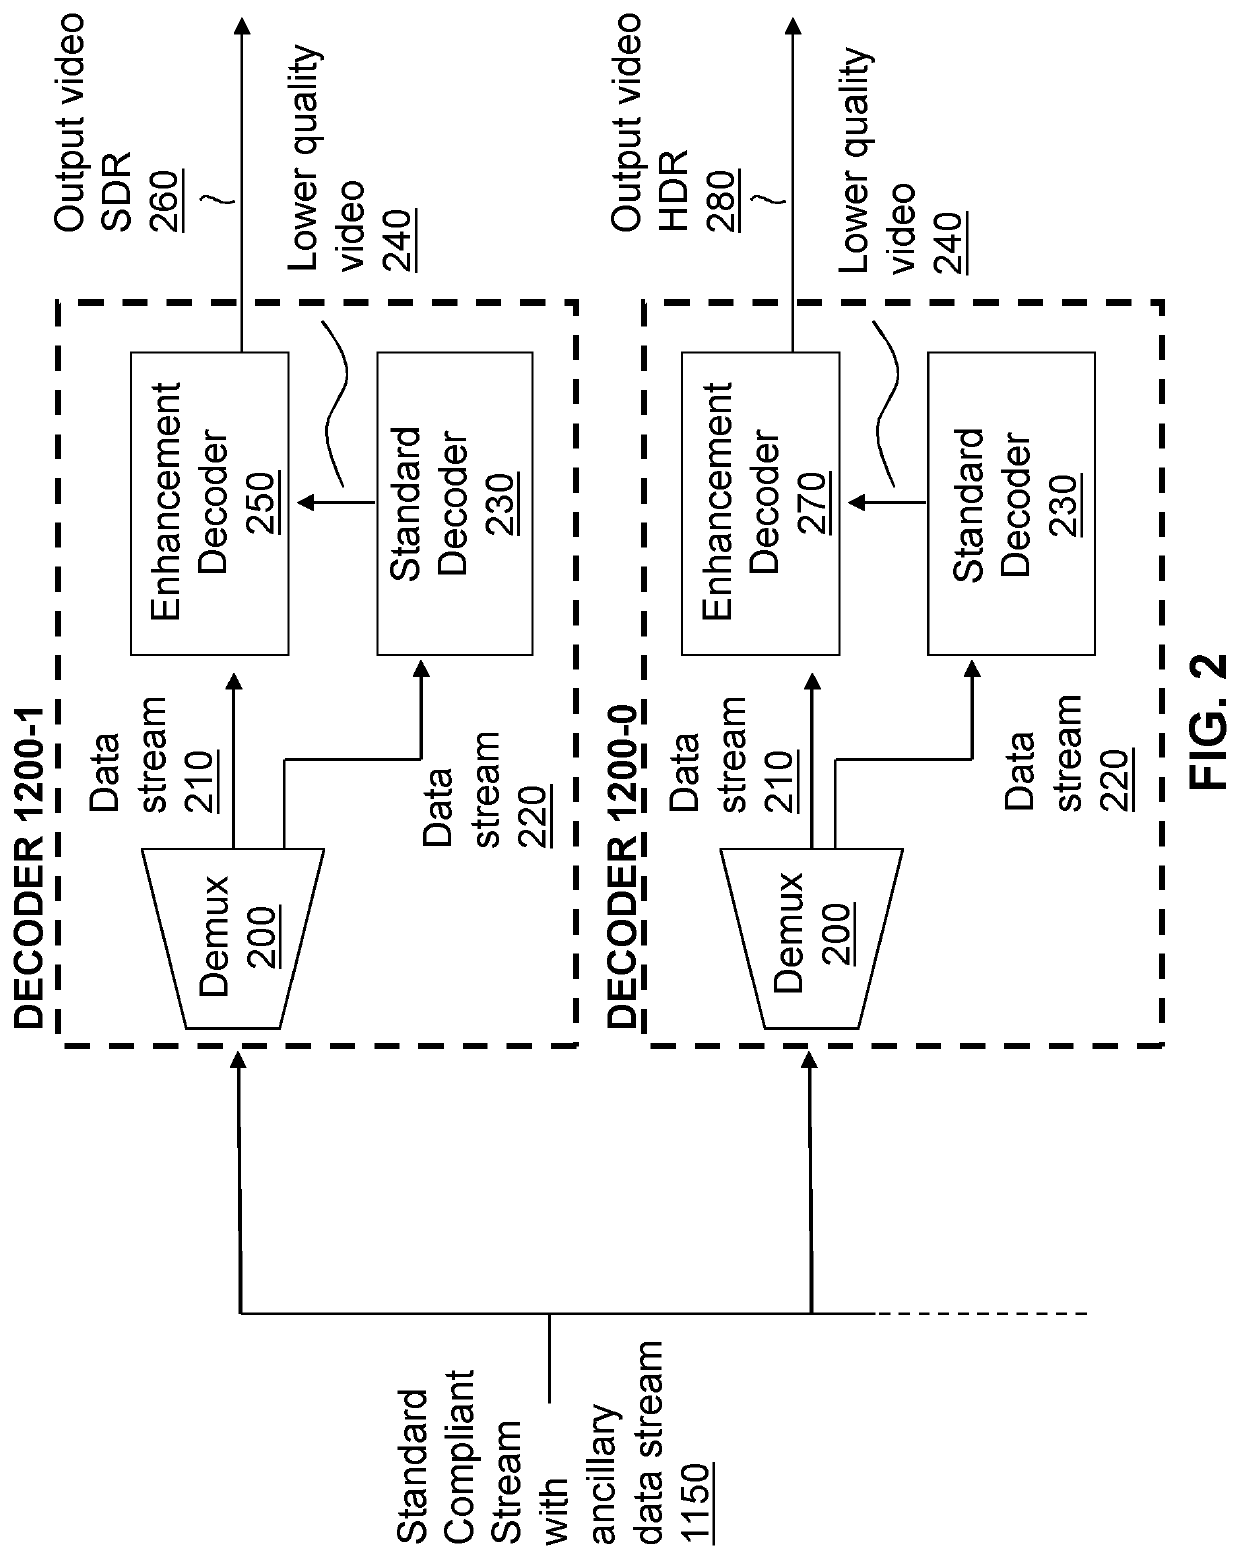 Dynamic range support within a multi-layer hierarchical coding scheme